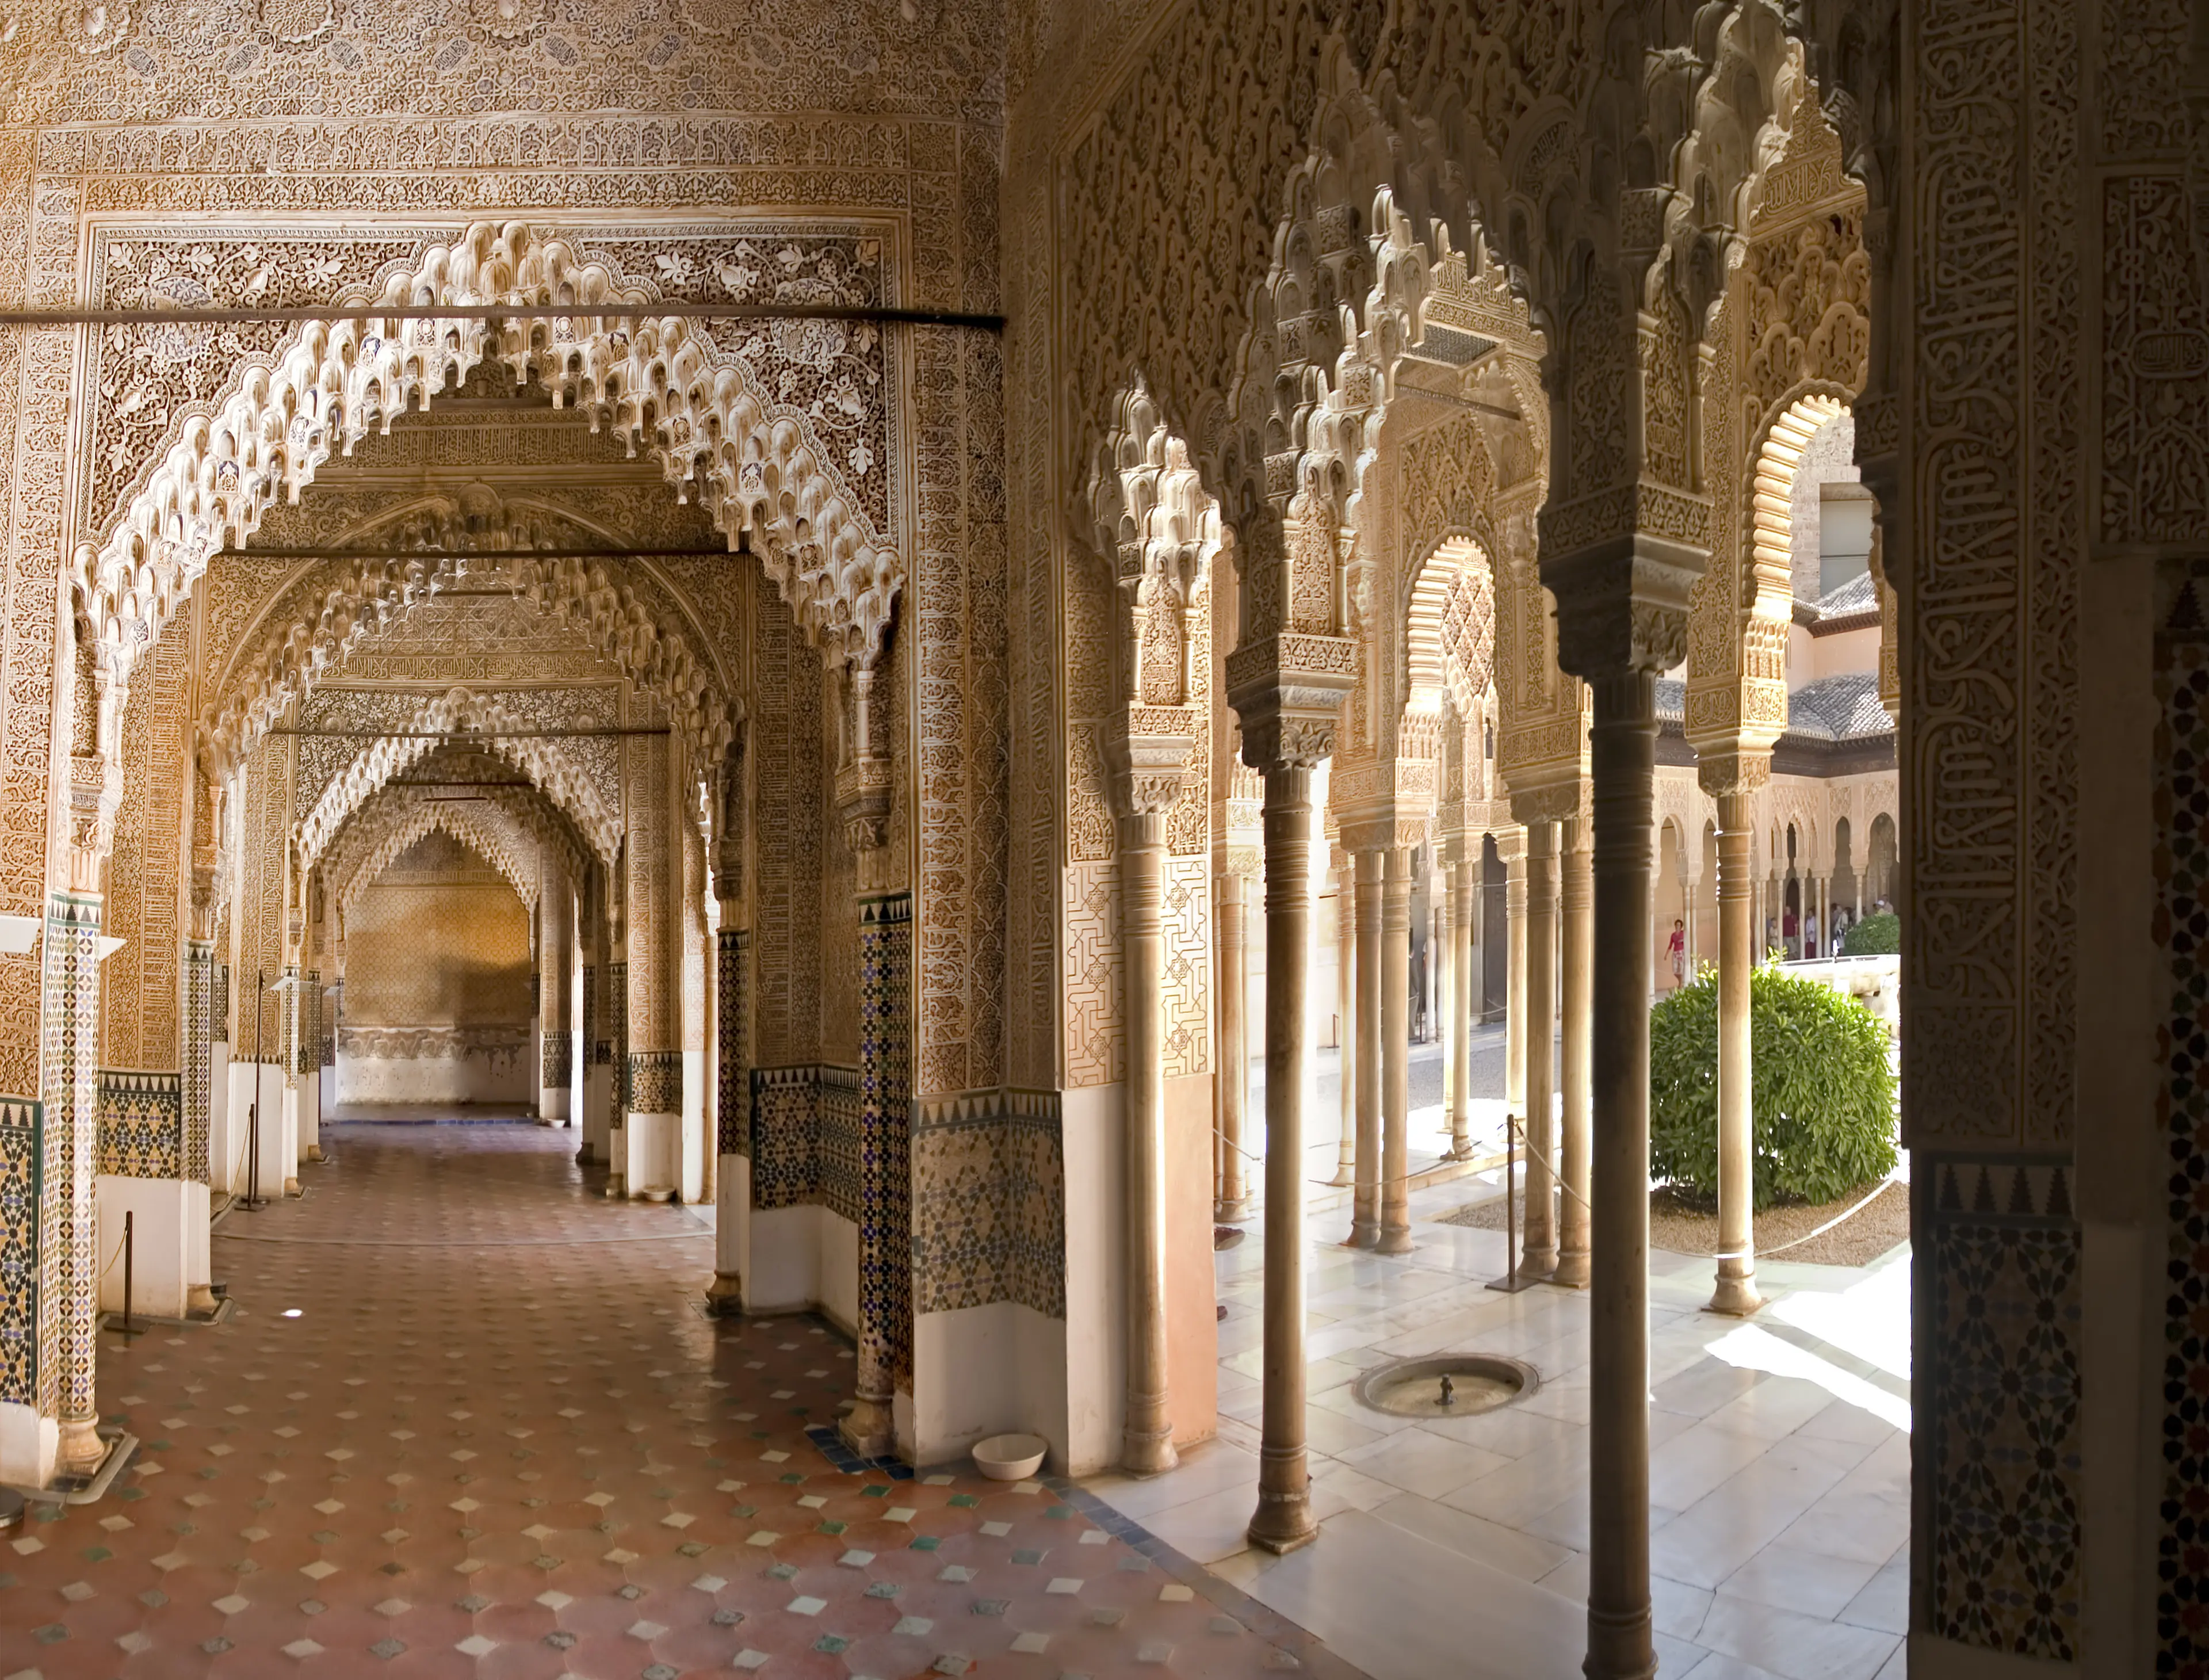 3-Day Family Adventure: Sightseeing and Nightlife in Granada, Spain